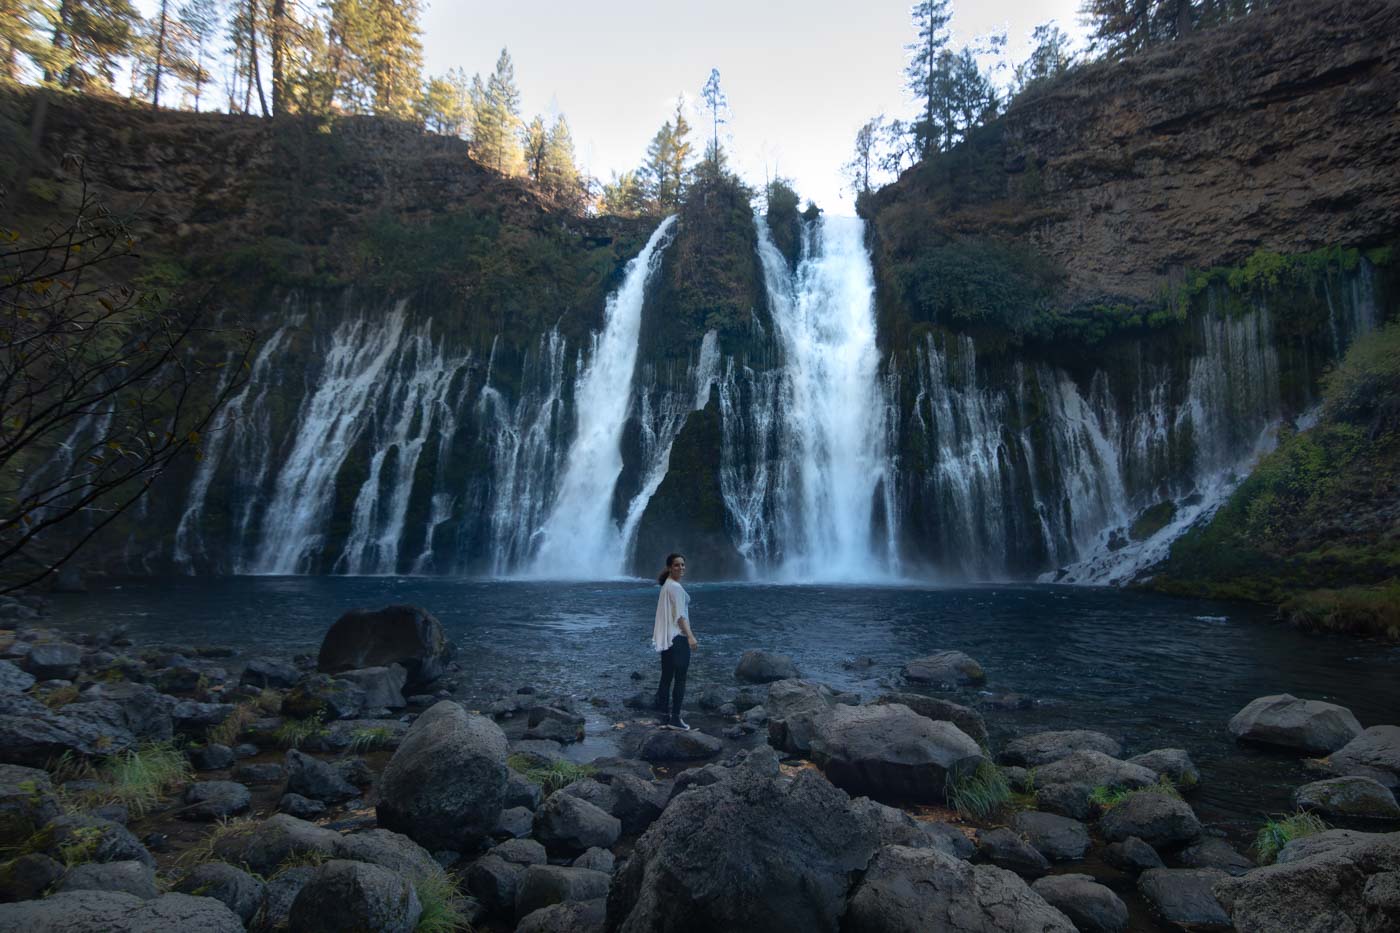 Me standing in front of Burney Falls on the rocky shores before the big blue pool of water.